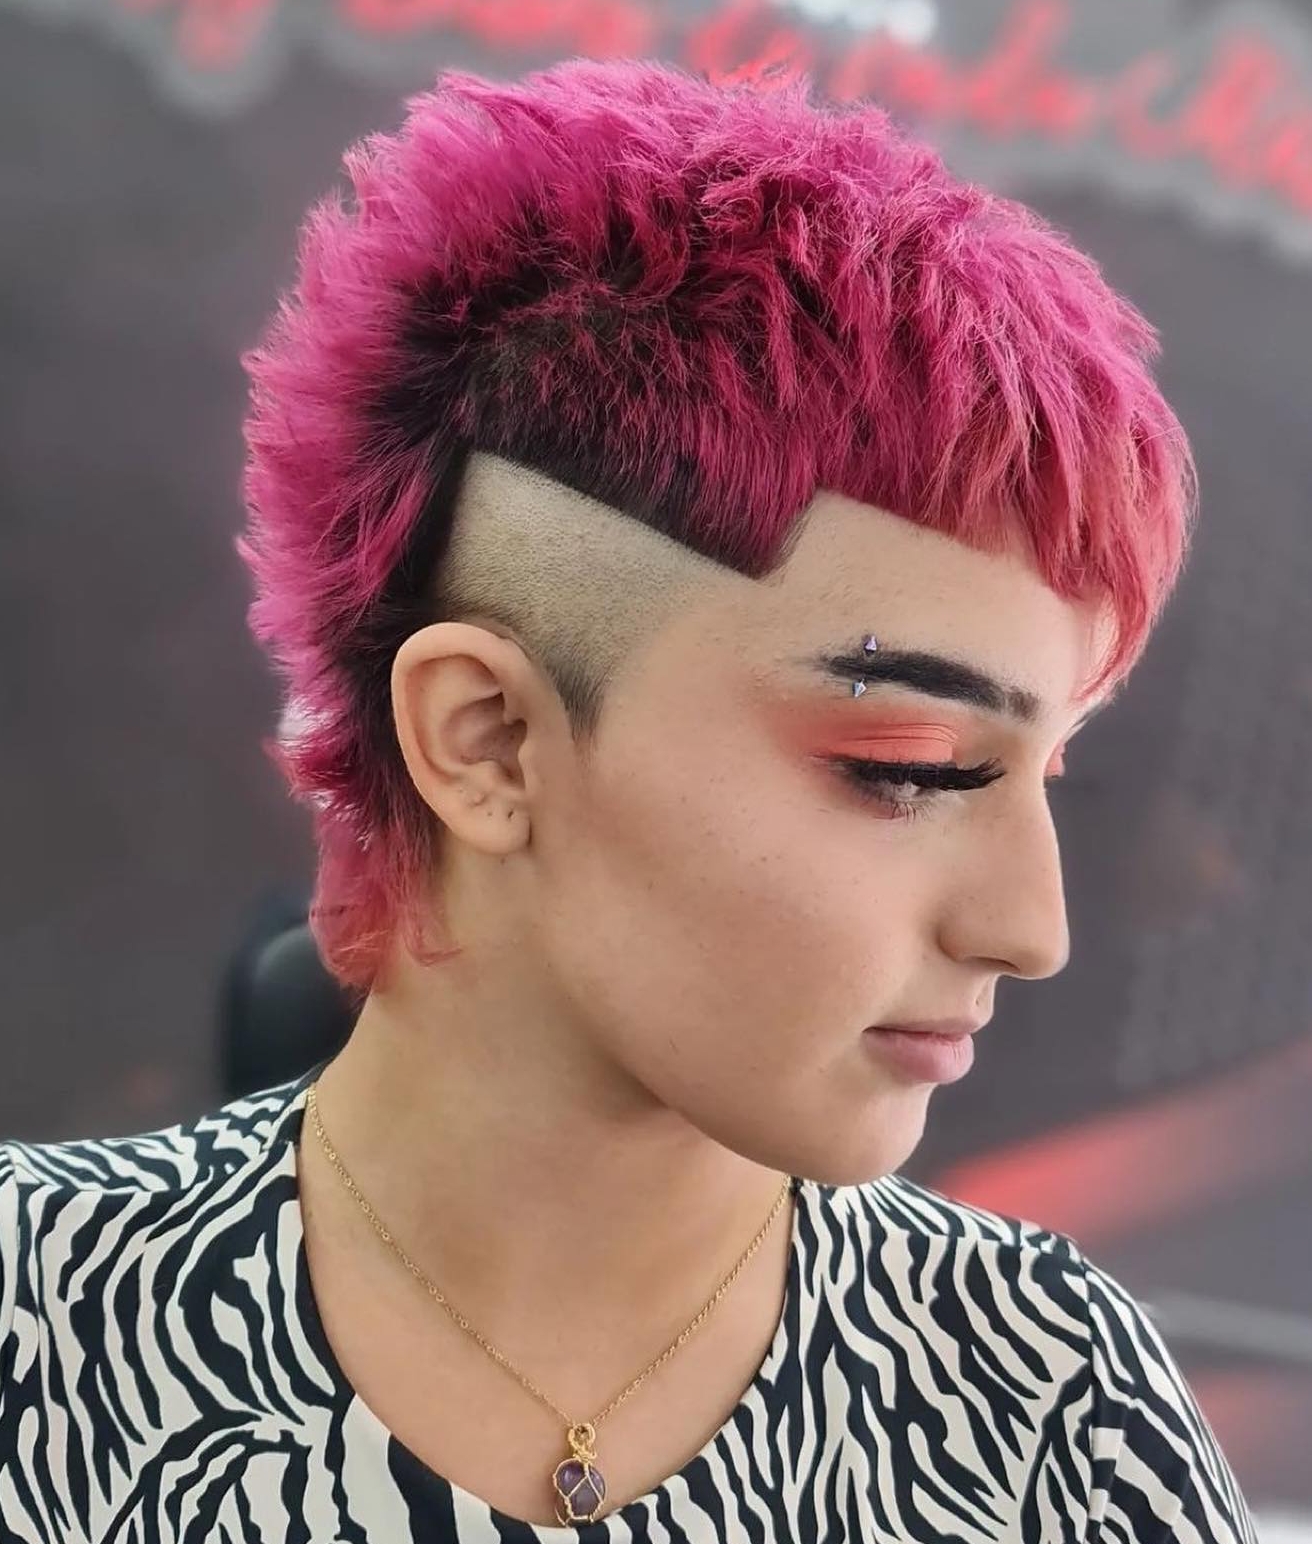 Mohawk Mullet Haircut on Pink Hair